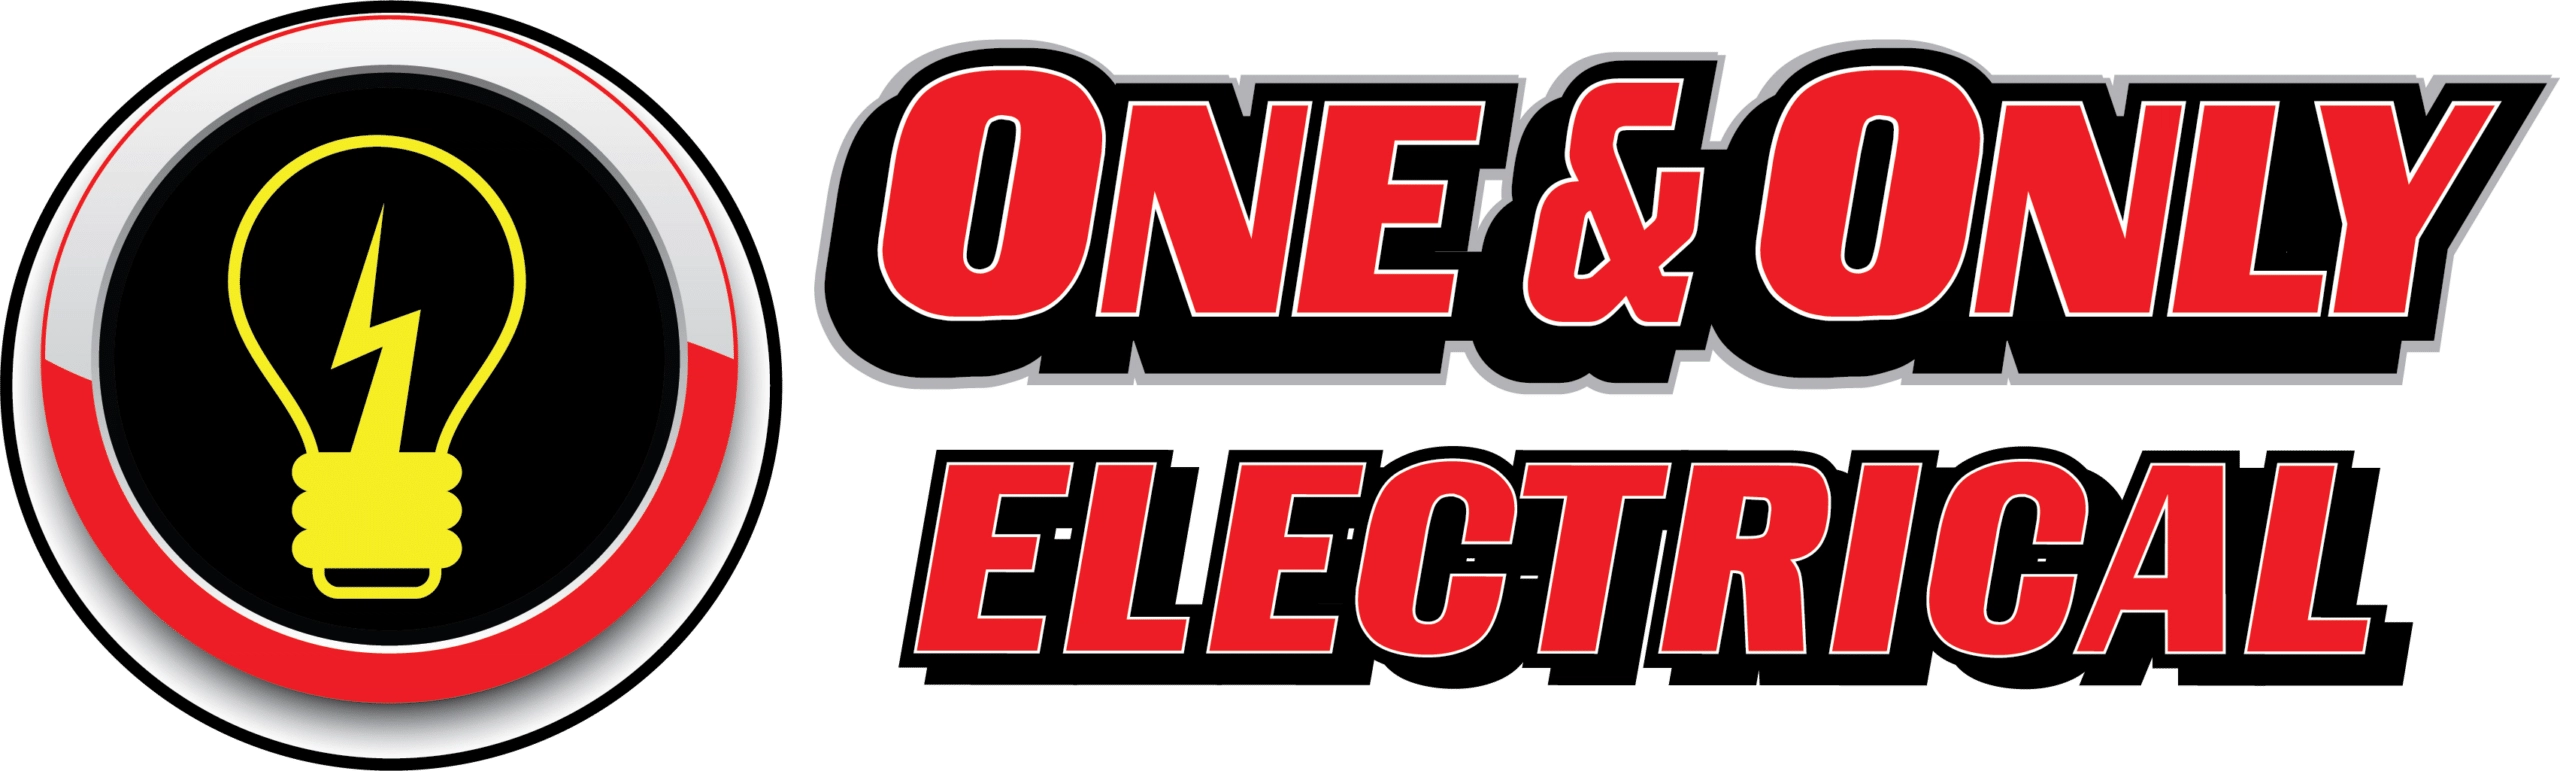 One & Only Electrical Service. inc Logo